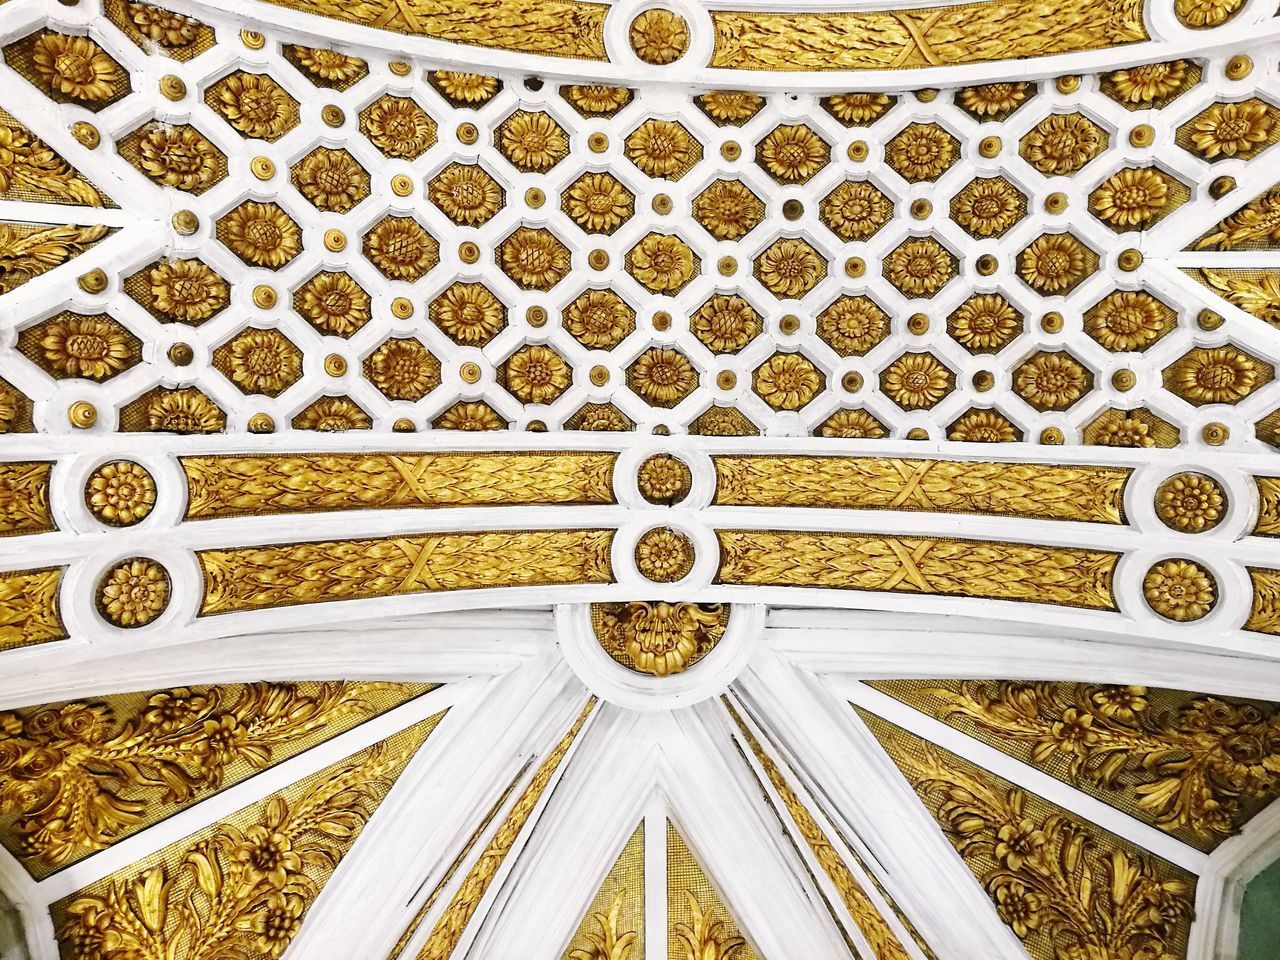 CLOSE-UP OF ORNATE METAL CEILING